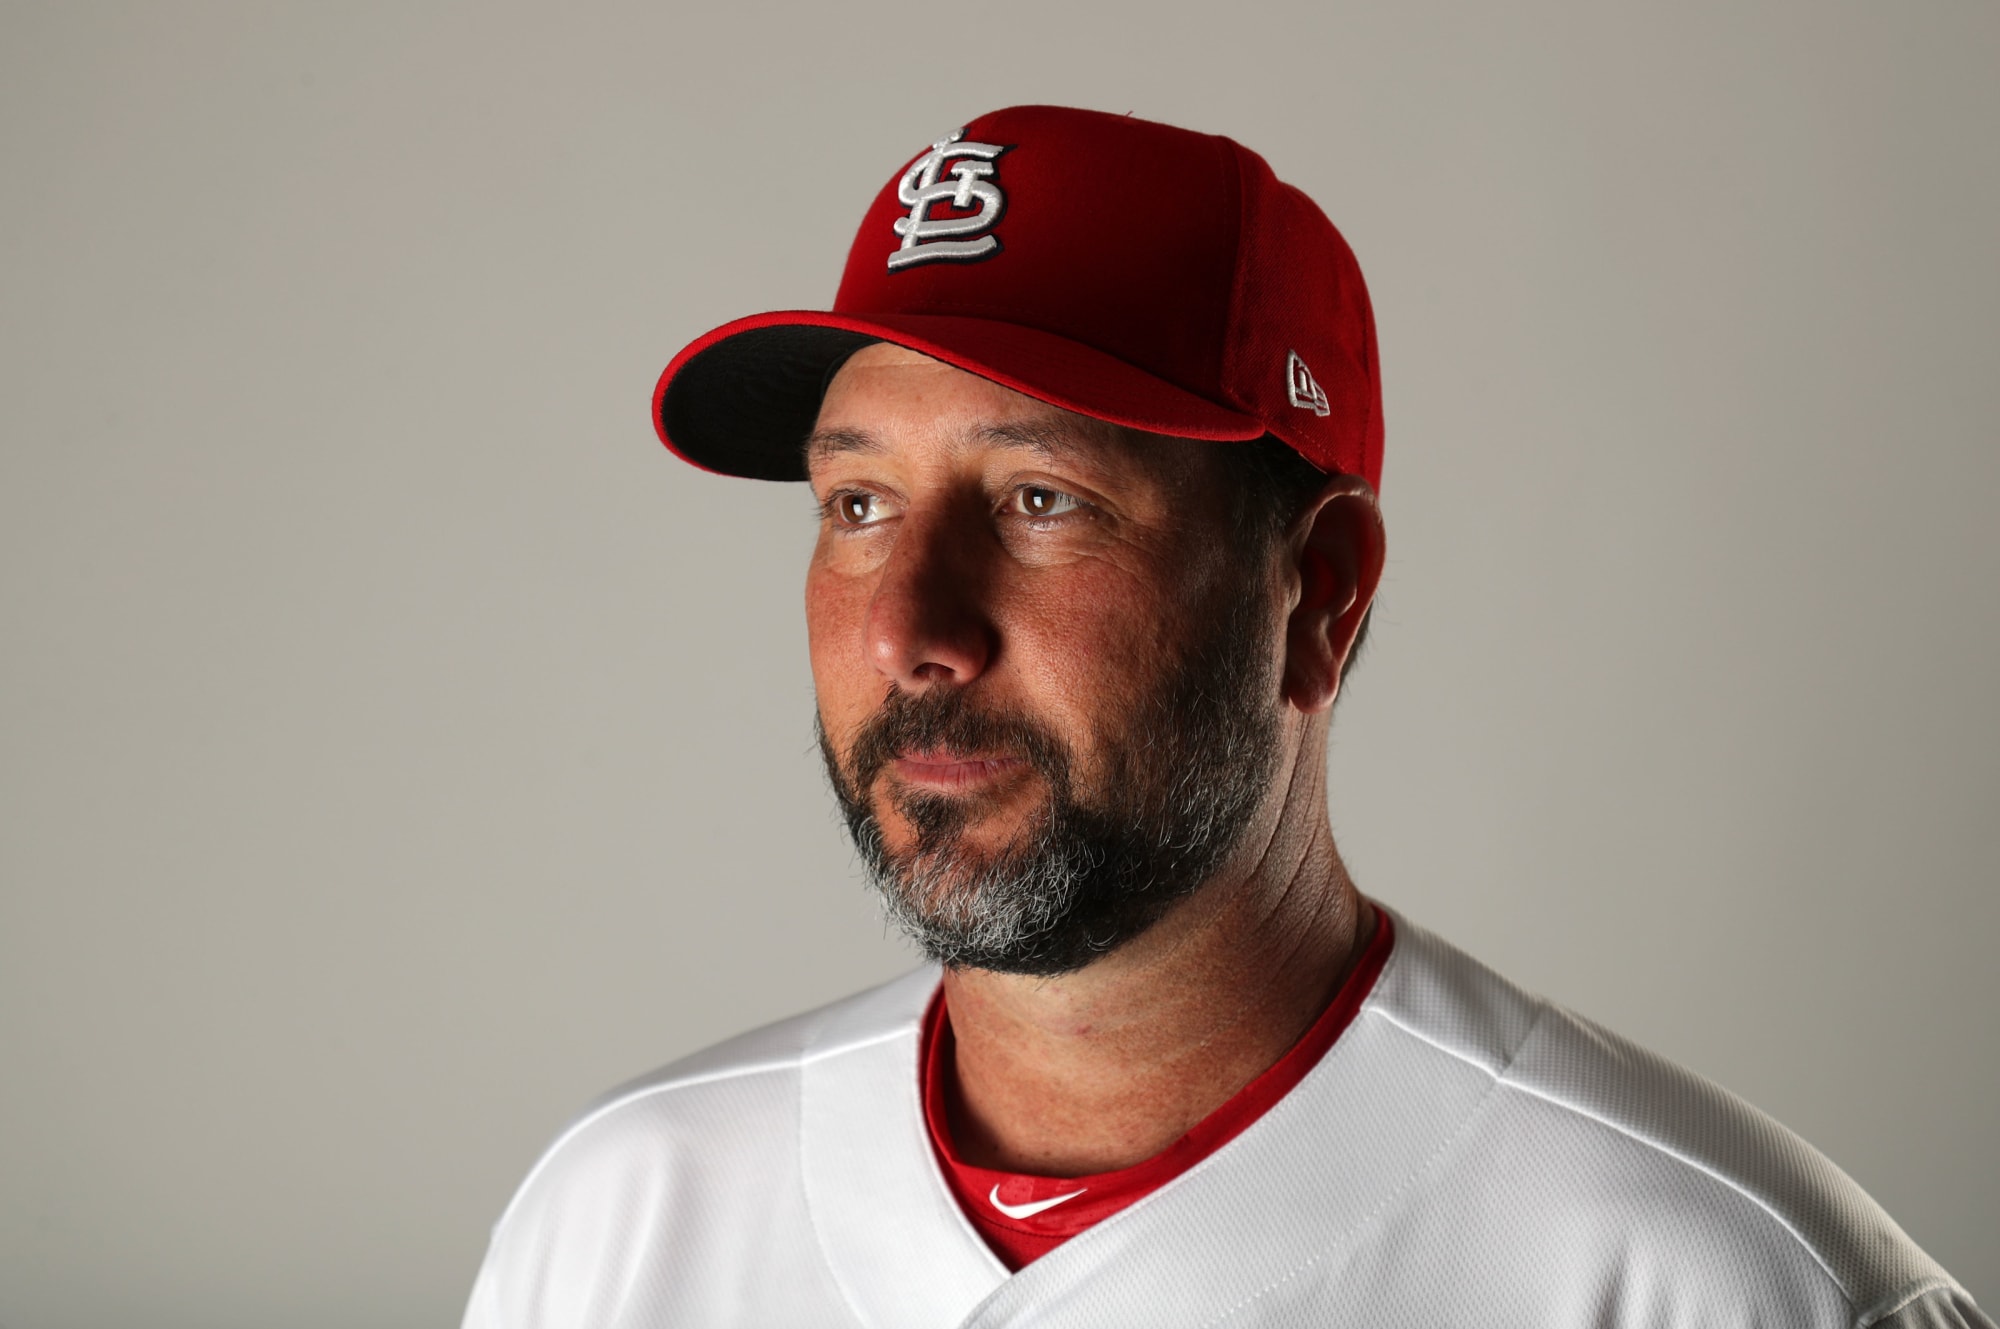 St. Louis Cardinals: Hitting coach alternatives to the absentee landlord